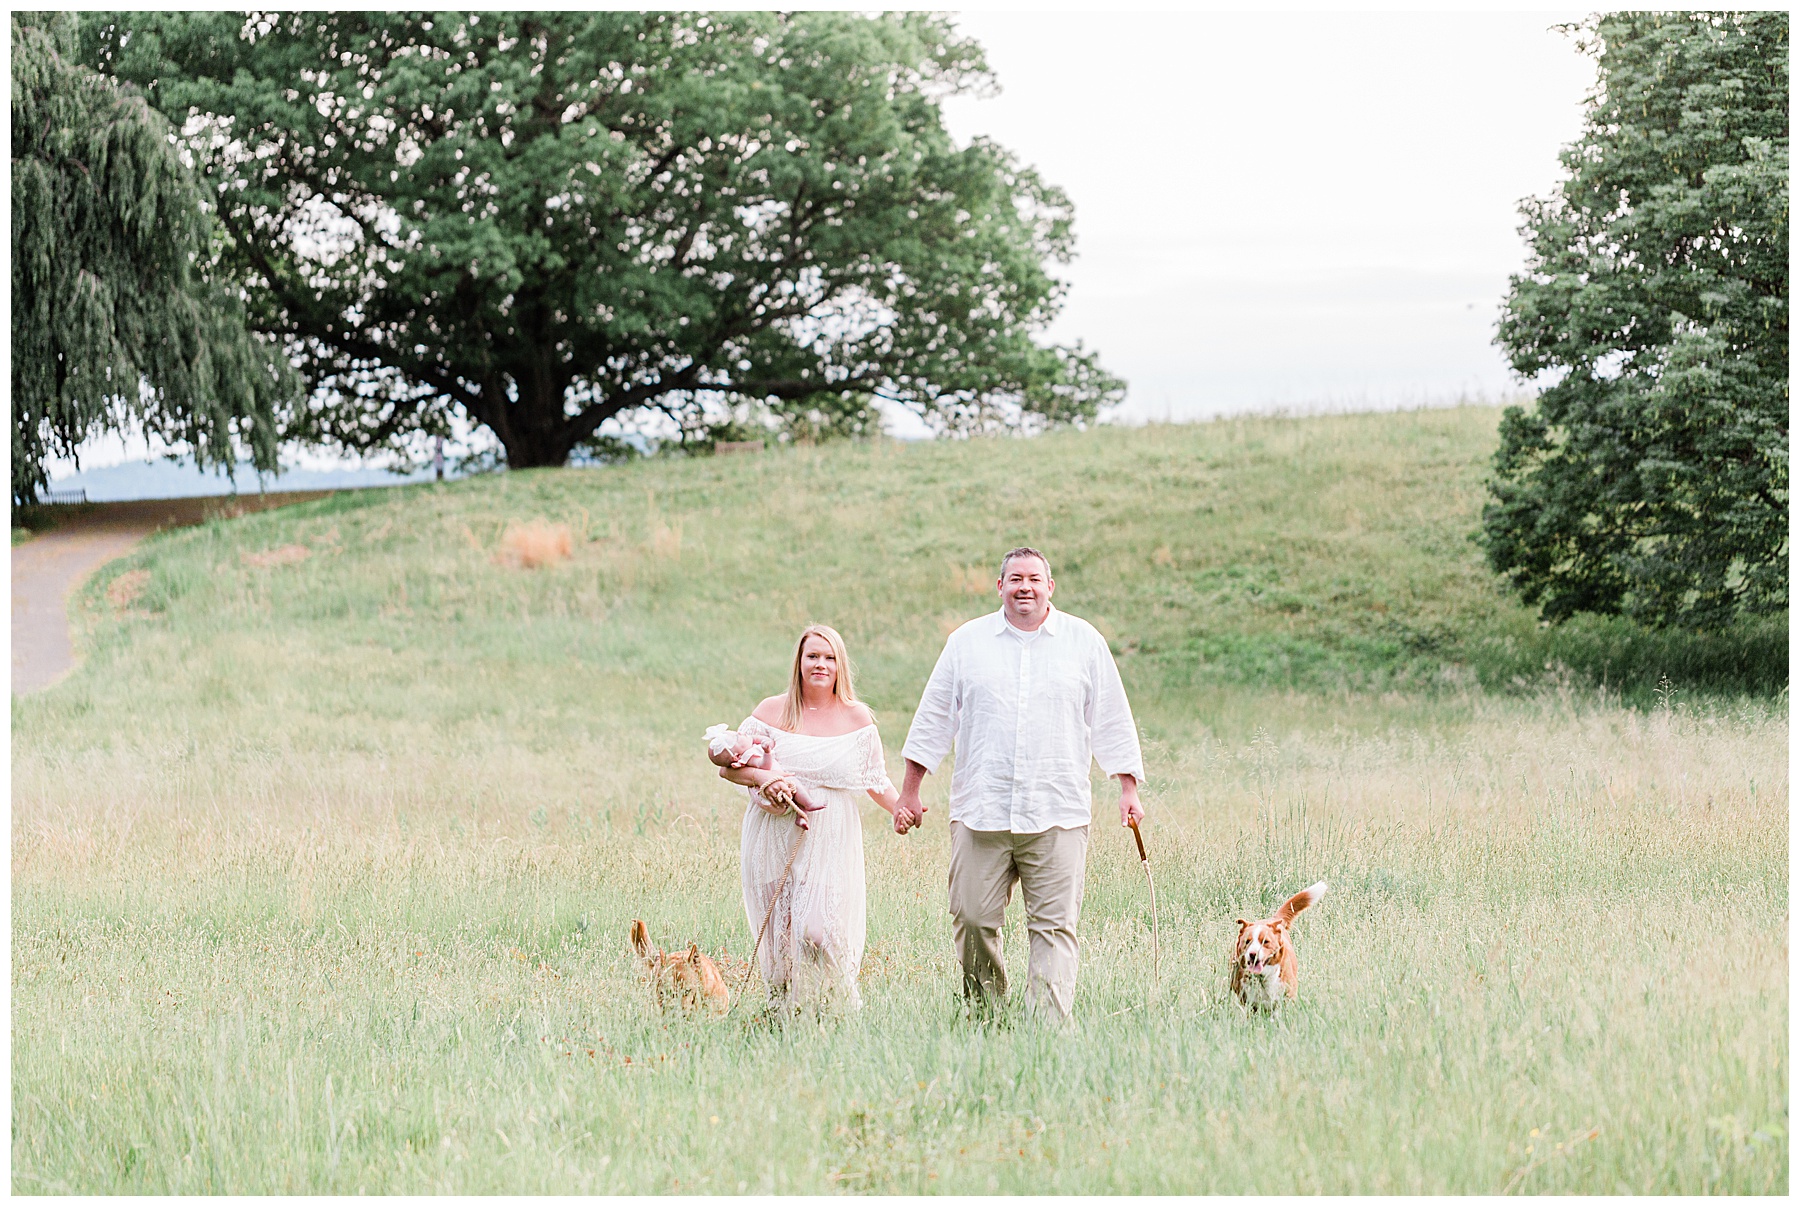 Mom-and-dad-walking-with-dogs-and-baby-in-field